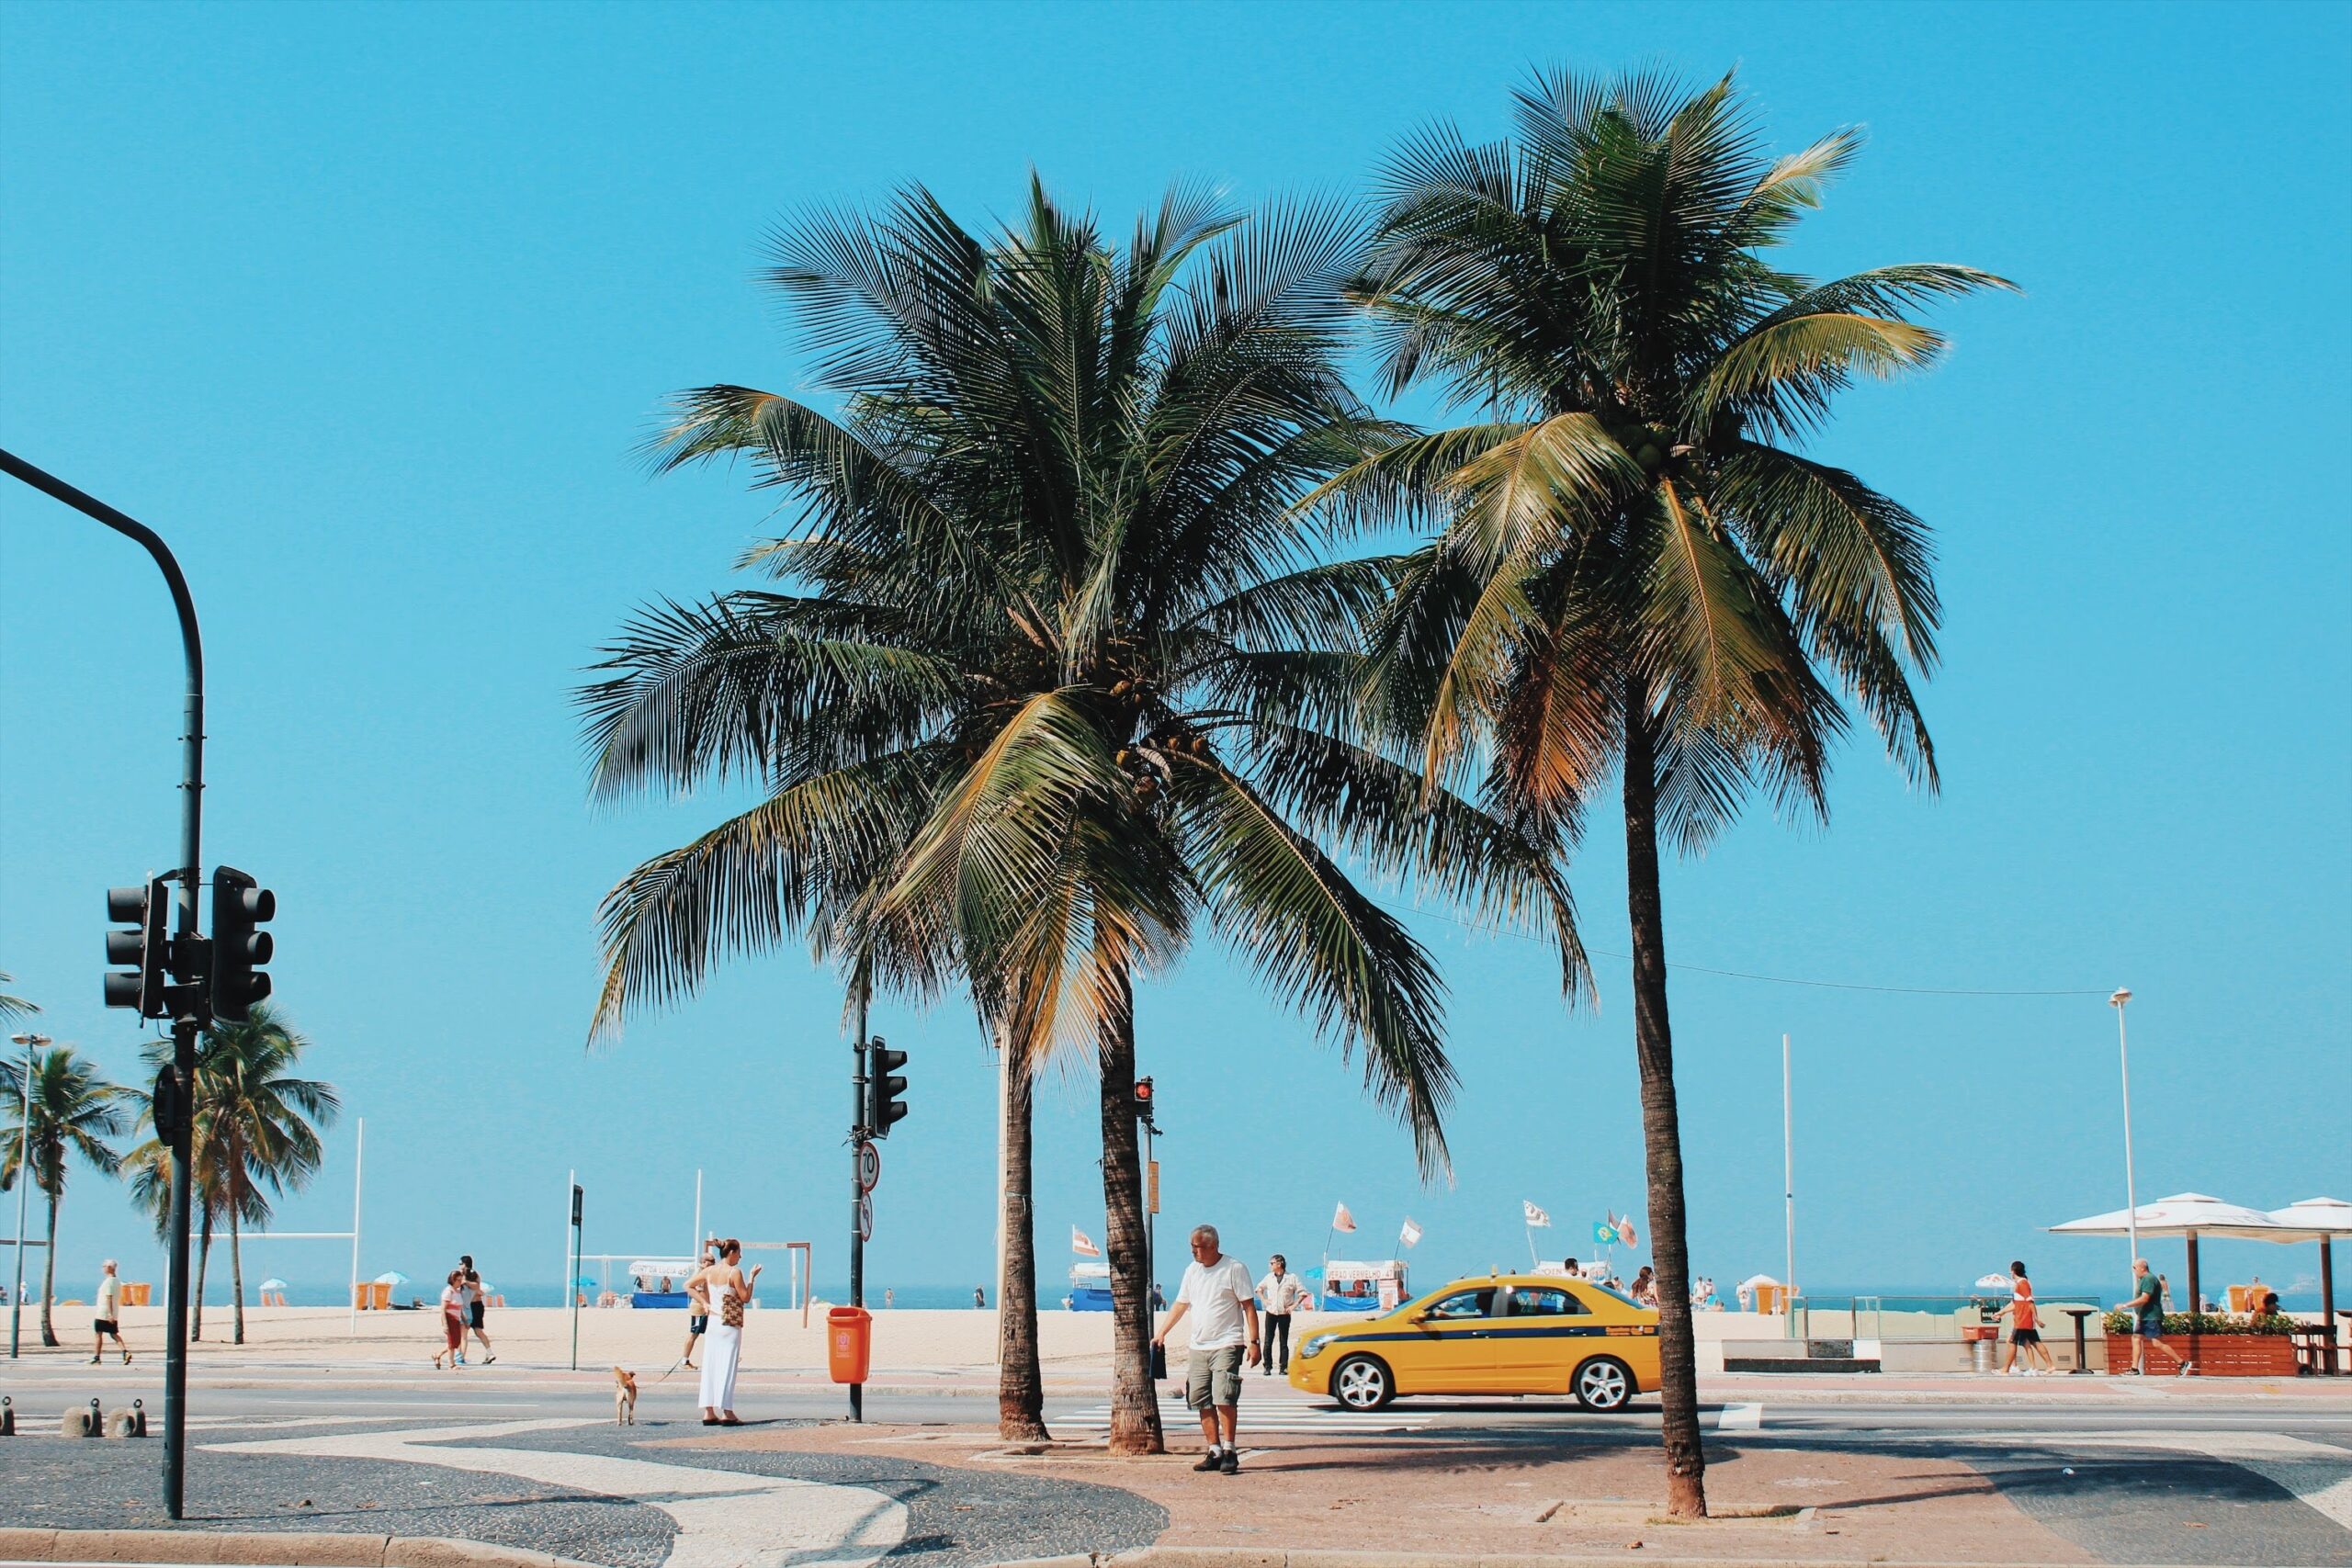 Since Rio de Janeiro is a generally safe place to visit and is tropical, the best times to visit vary. Check out the benefits of each season. 
pictured: Rio de Janeiro's streets on a clear sunny day embellished with palm trees and pedestrians walking around 